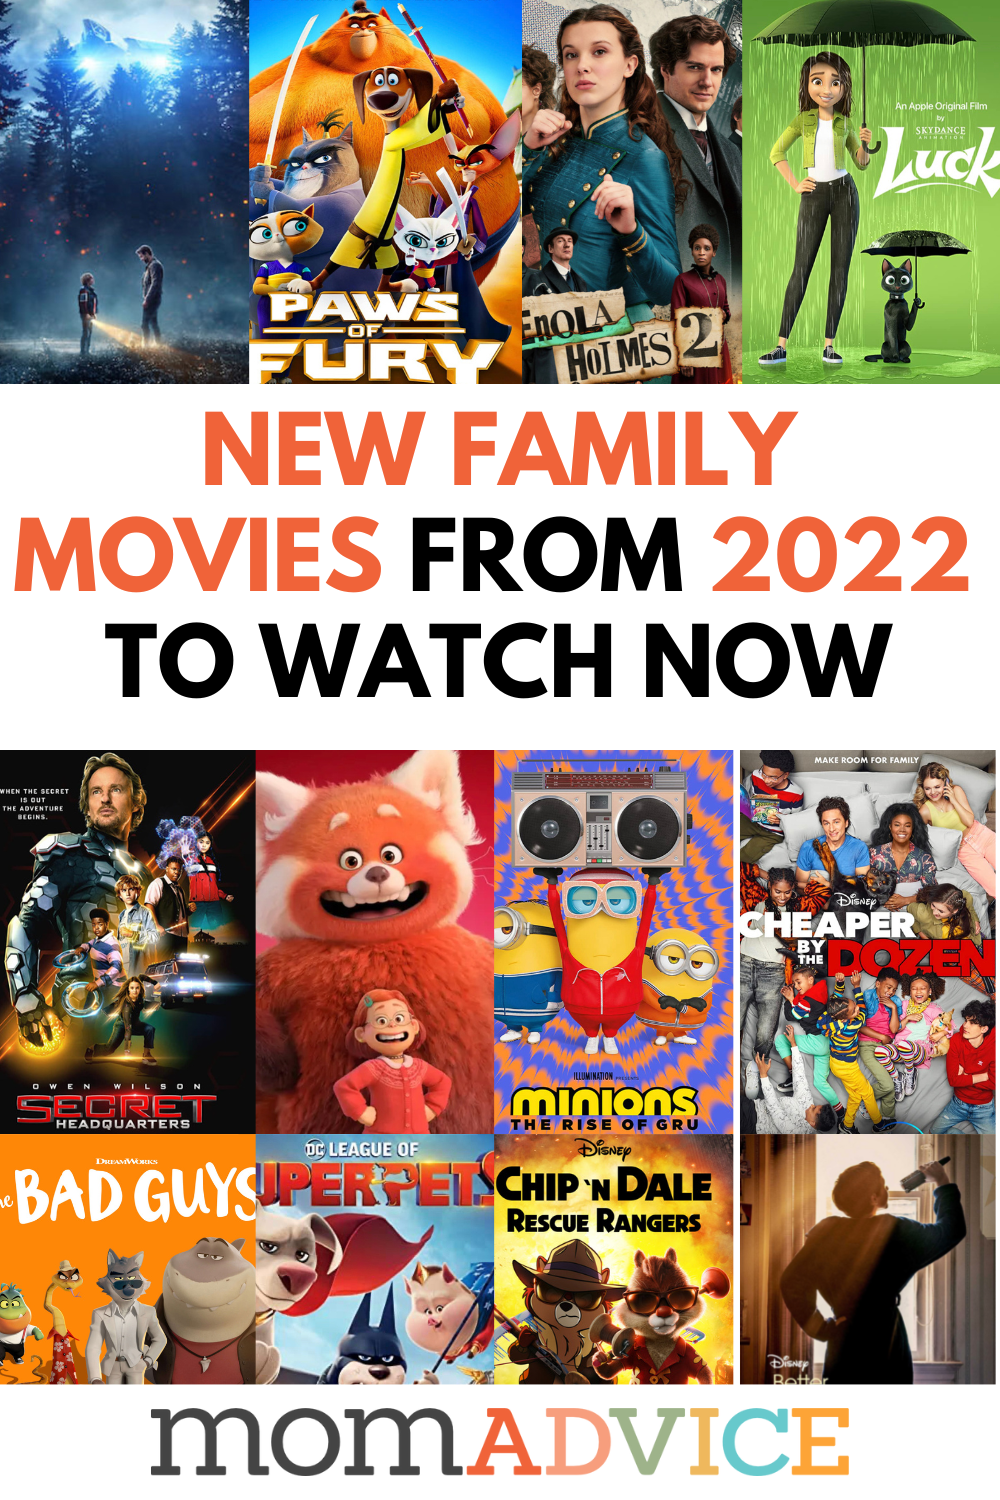 New Family Movies From 2022 To Watch Now - MomAdvice